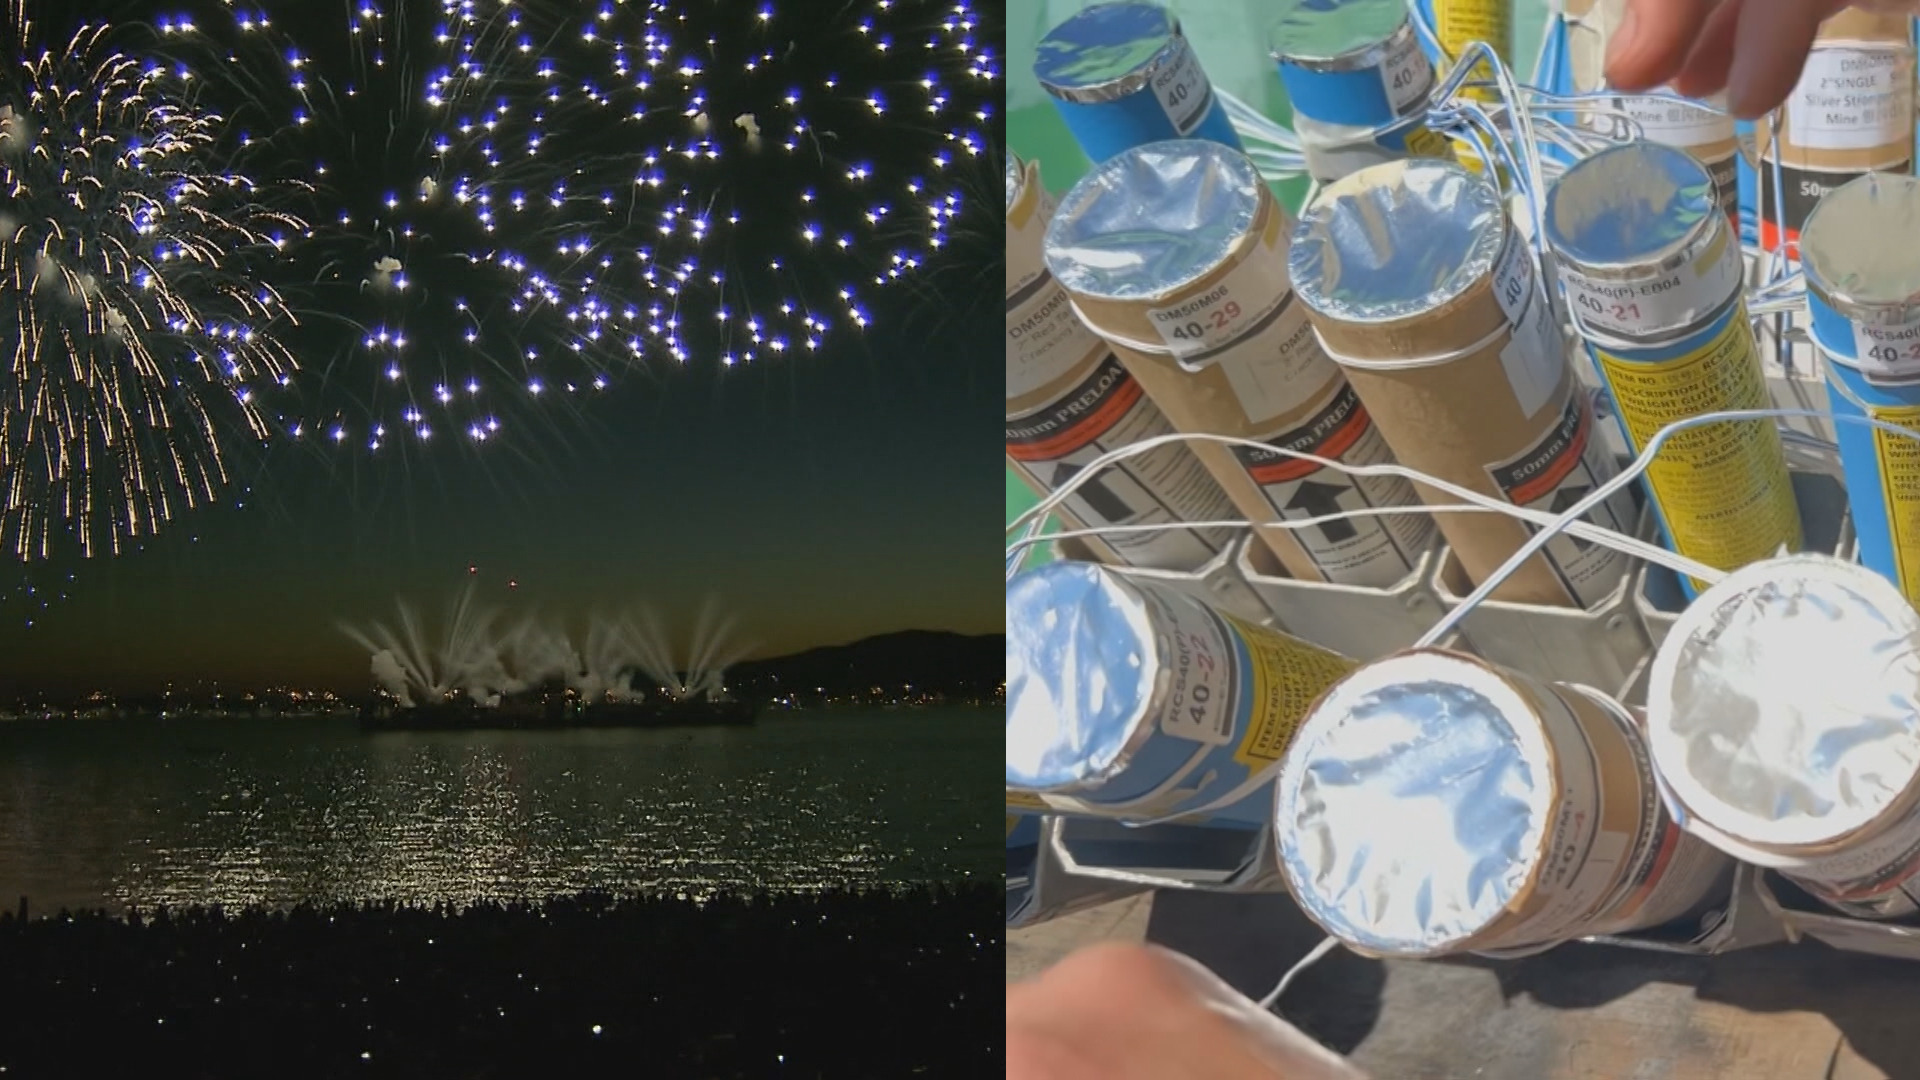 Celebration of Light returns to Vancouver for another year